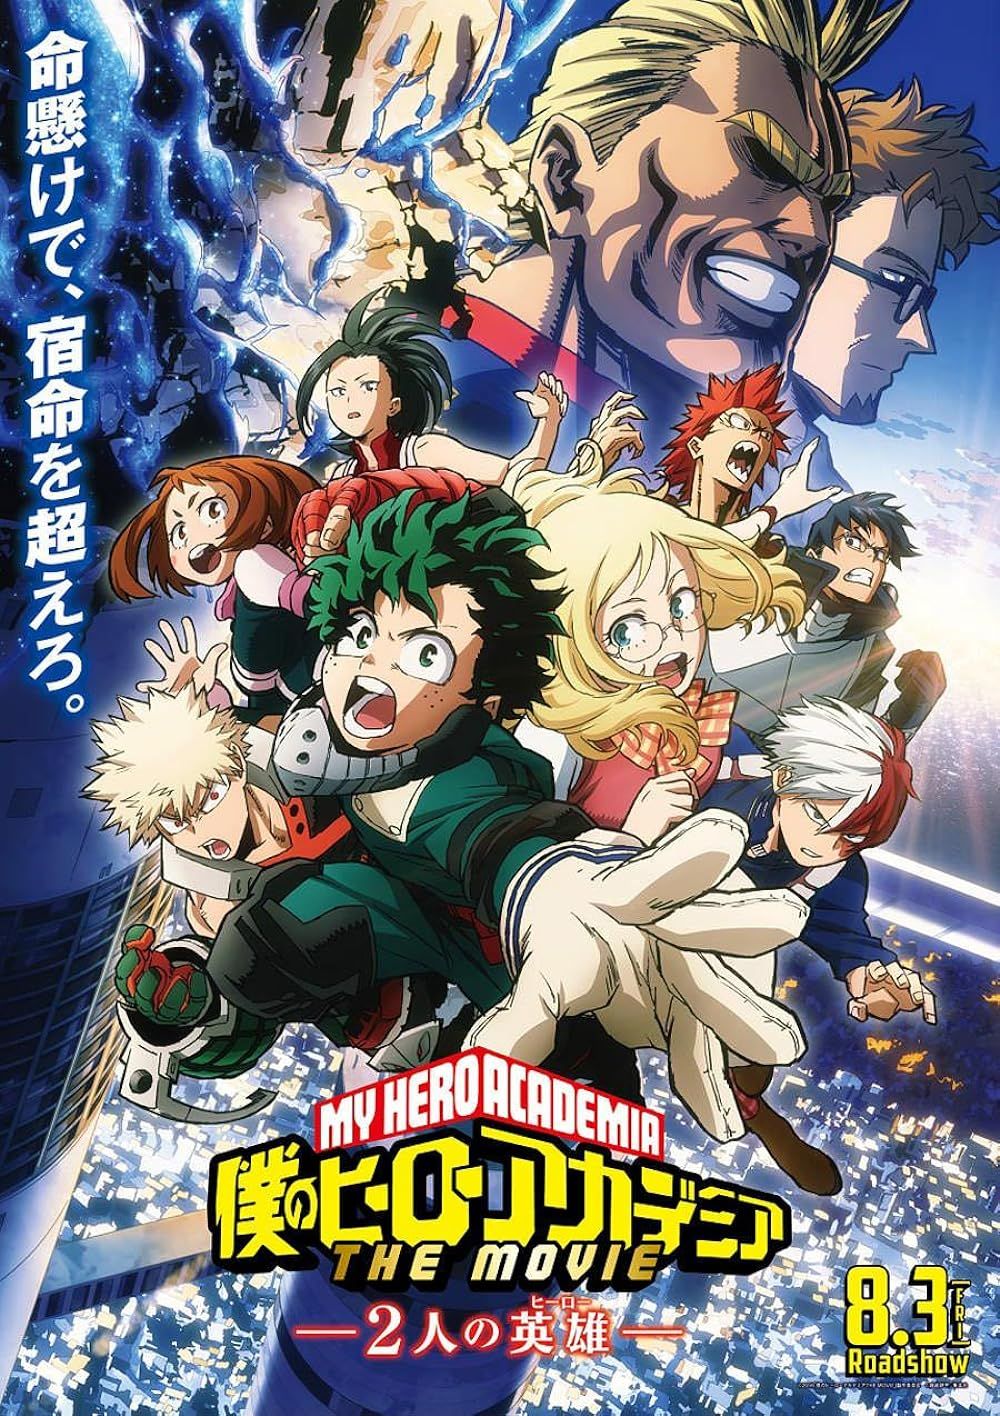 My Hero Academia Two Heroes (2018) Hindi Dubbed Movie download full movie